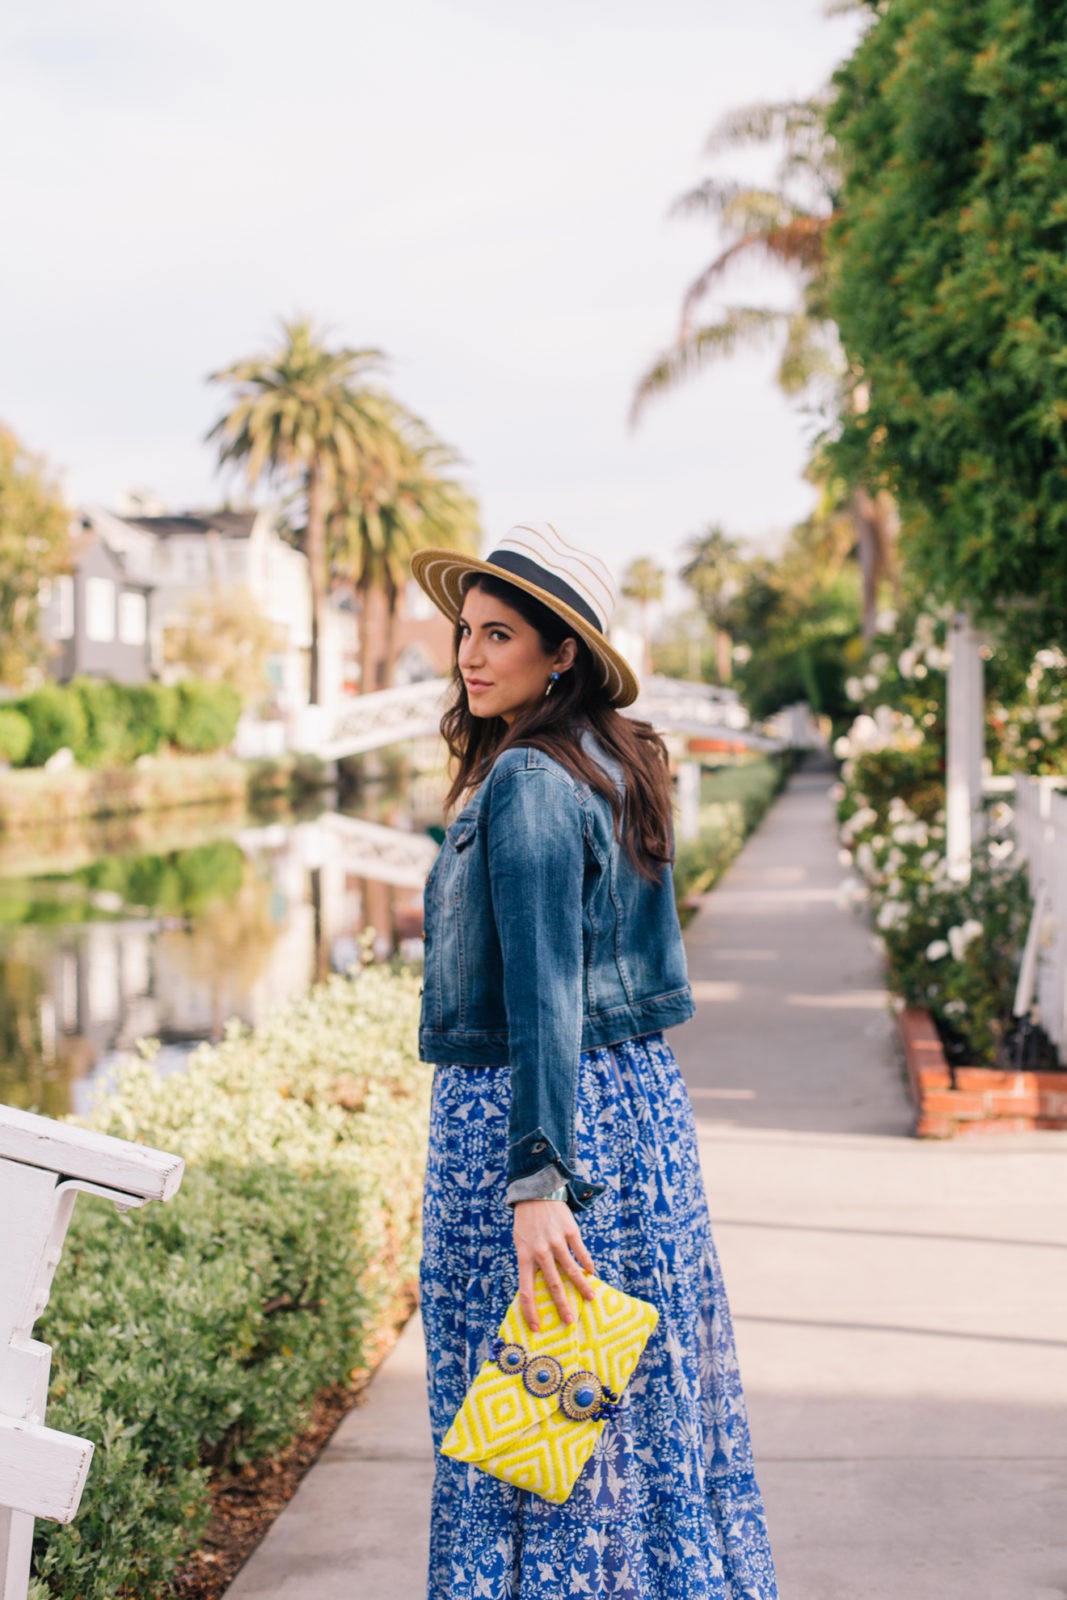 Stage Summer Moments, 2019 Summer Bucket List Moments by popular Los Angeles Lifestyle Blogger Laura Lily: image of woman at Venice, California canals wearing Stage Stores flowing blue and white floral maxi dress, cropped jean jacket, straw sun hat and holding a yellow clutch.